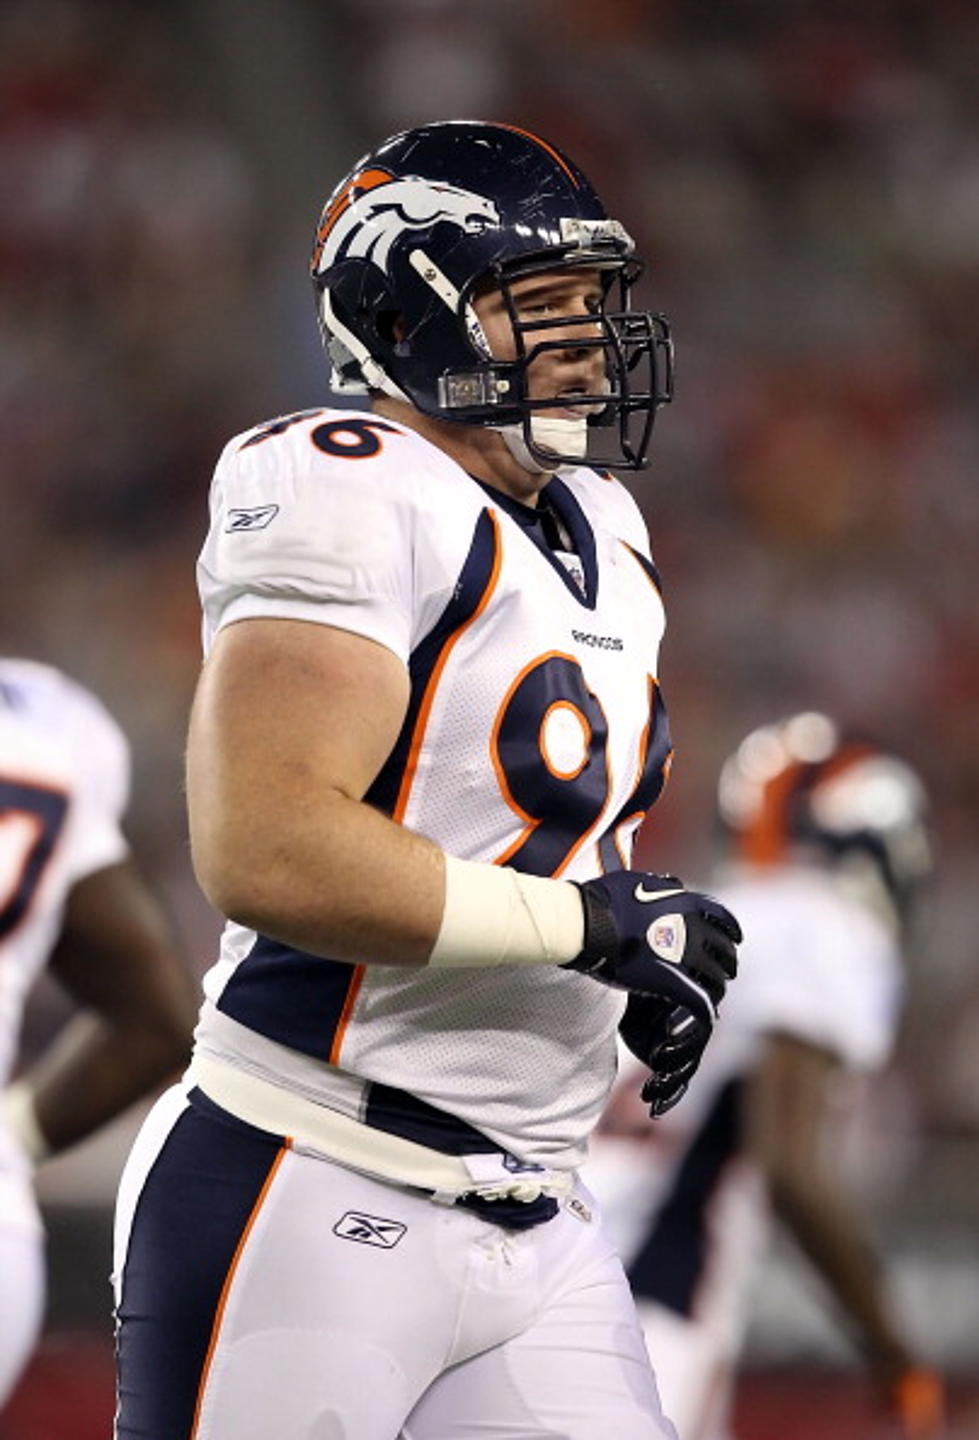 Town Of Eaton Rallies To Support Denver Broncos Defensive Tackle & Eaton Native Mitch Unrein